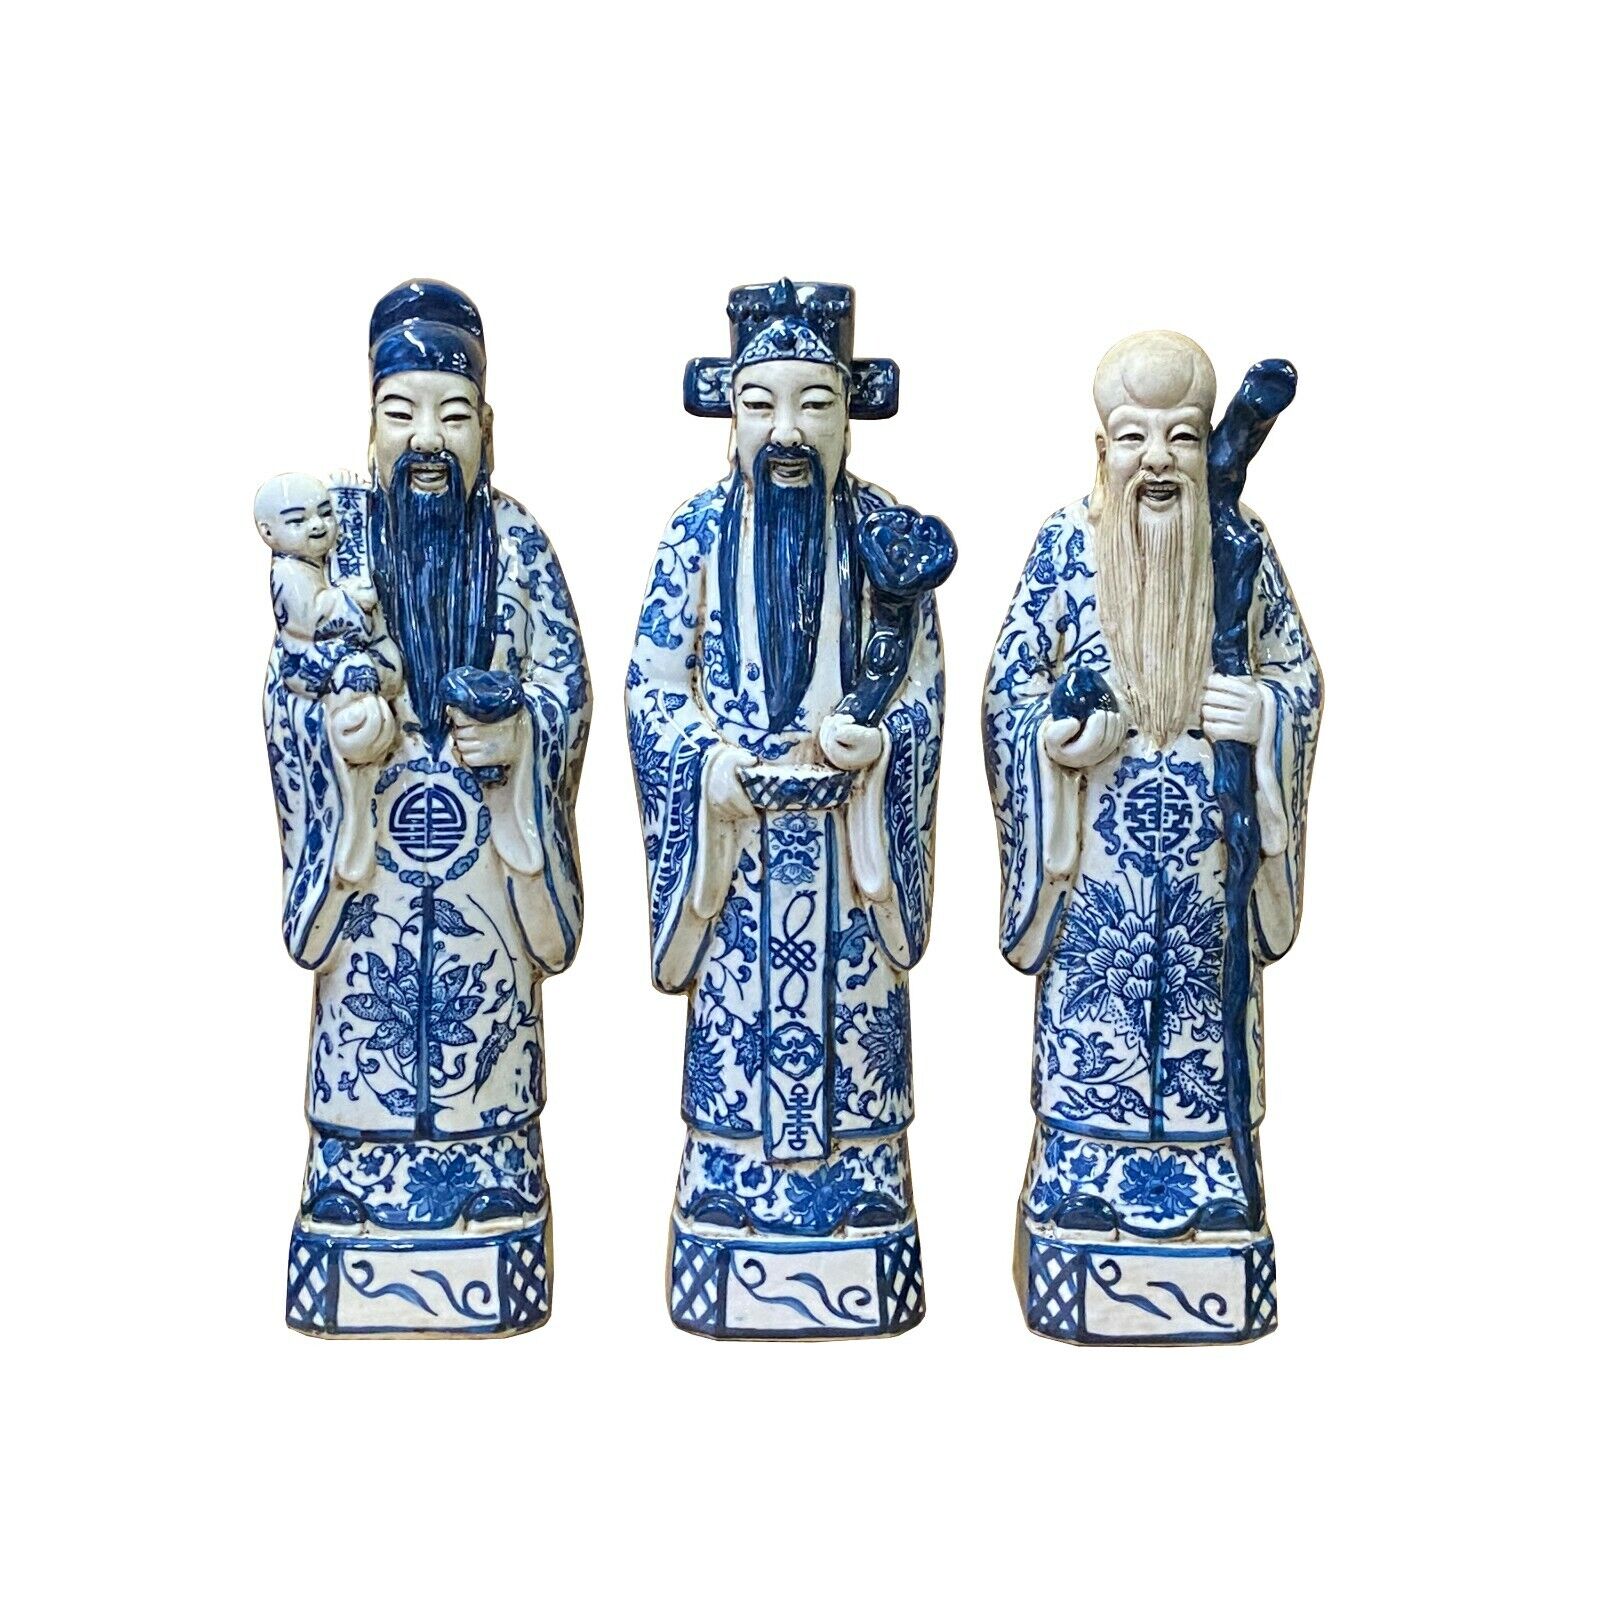 Chinese Distressed Blue White Color Fengshui Fok Lok Shao Figure Set ws2079